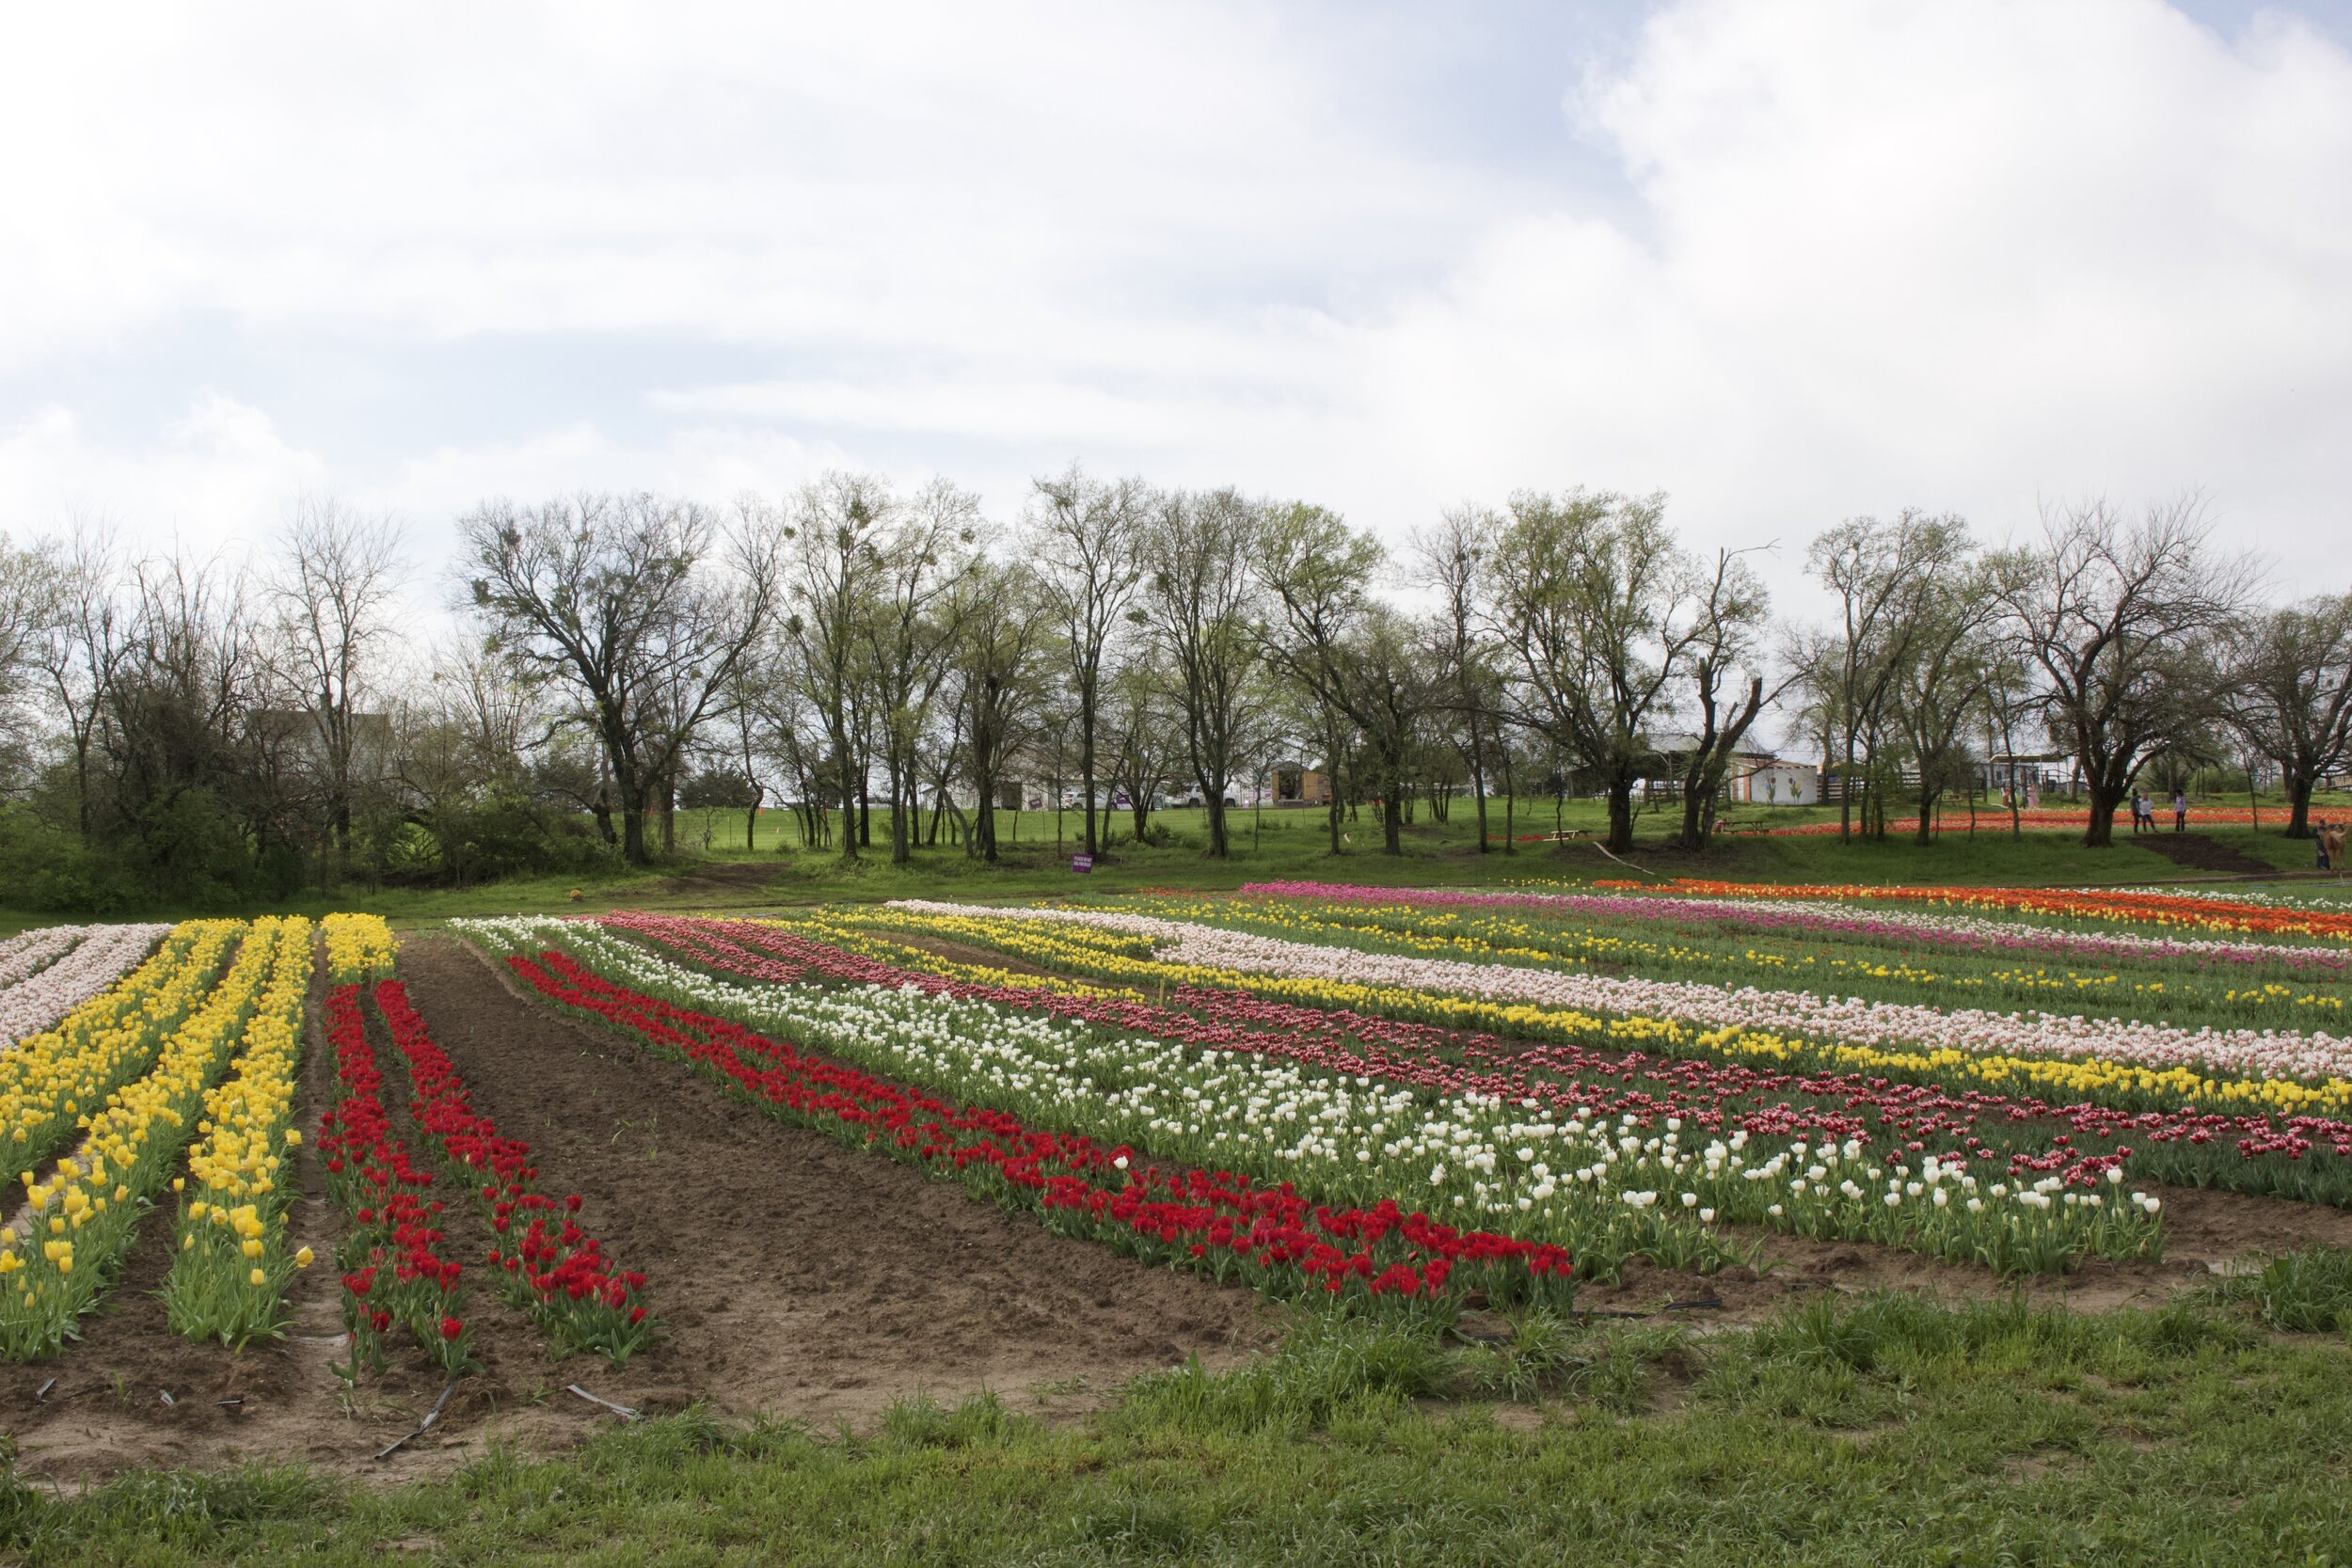  In December 2019. John and his teams began planting the bulbs for the spring season. Over 100,000 bulbs were planted on the top field, which is called the triangle. On the bottom field, which is called the nursery. over 500,000 tulip bulbs were plan